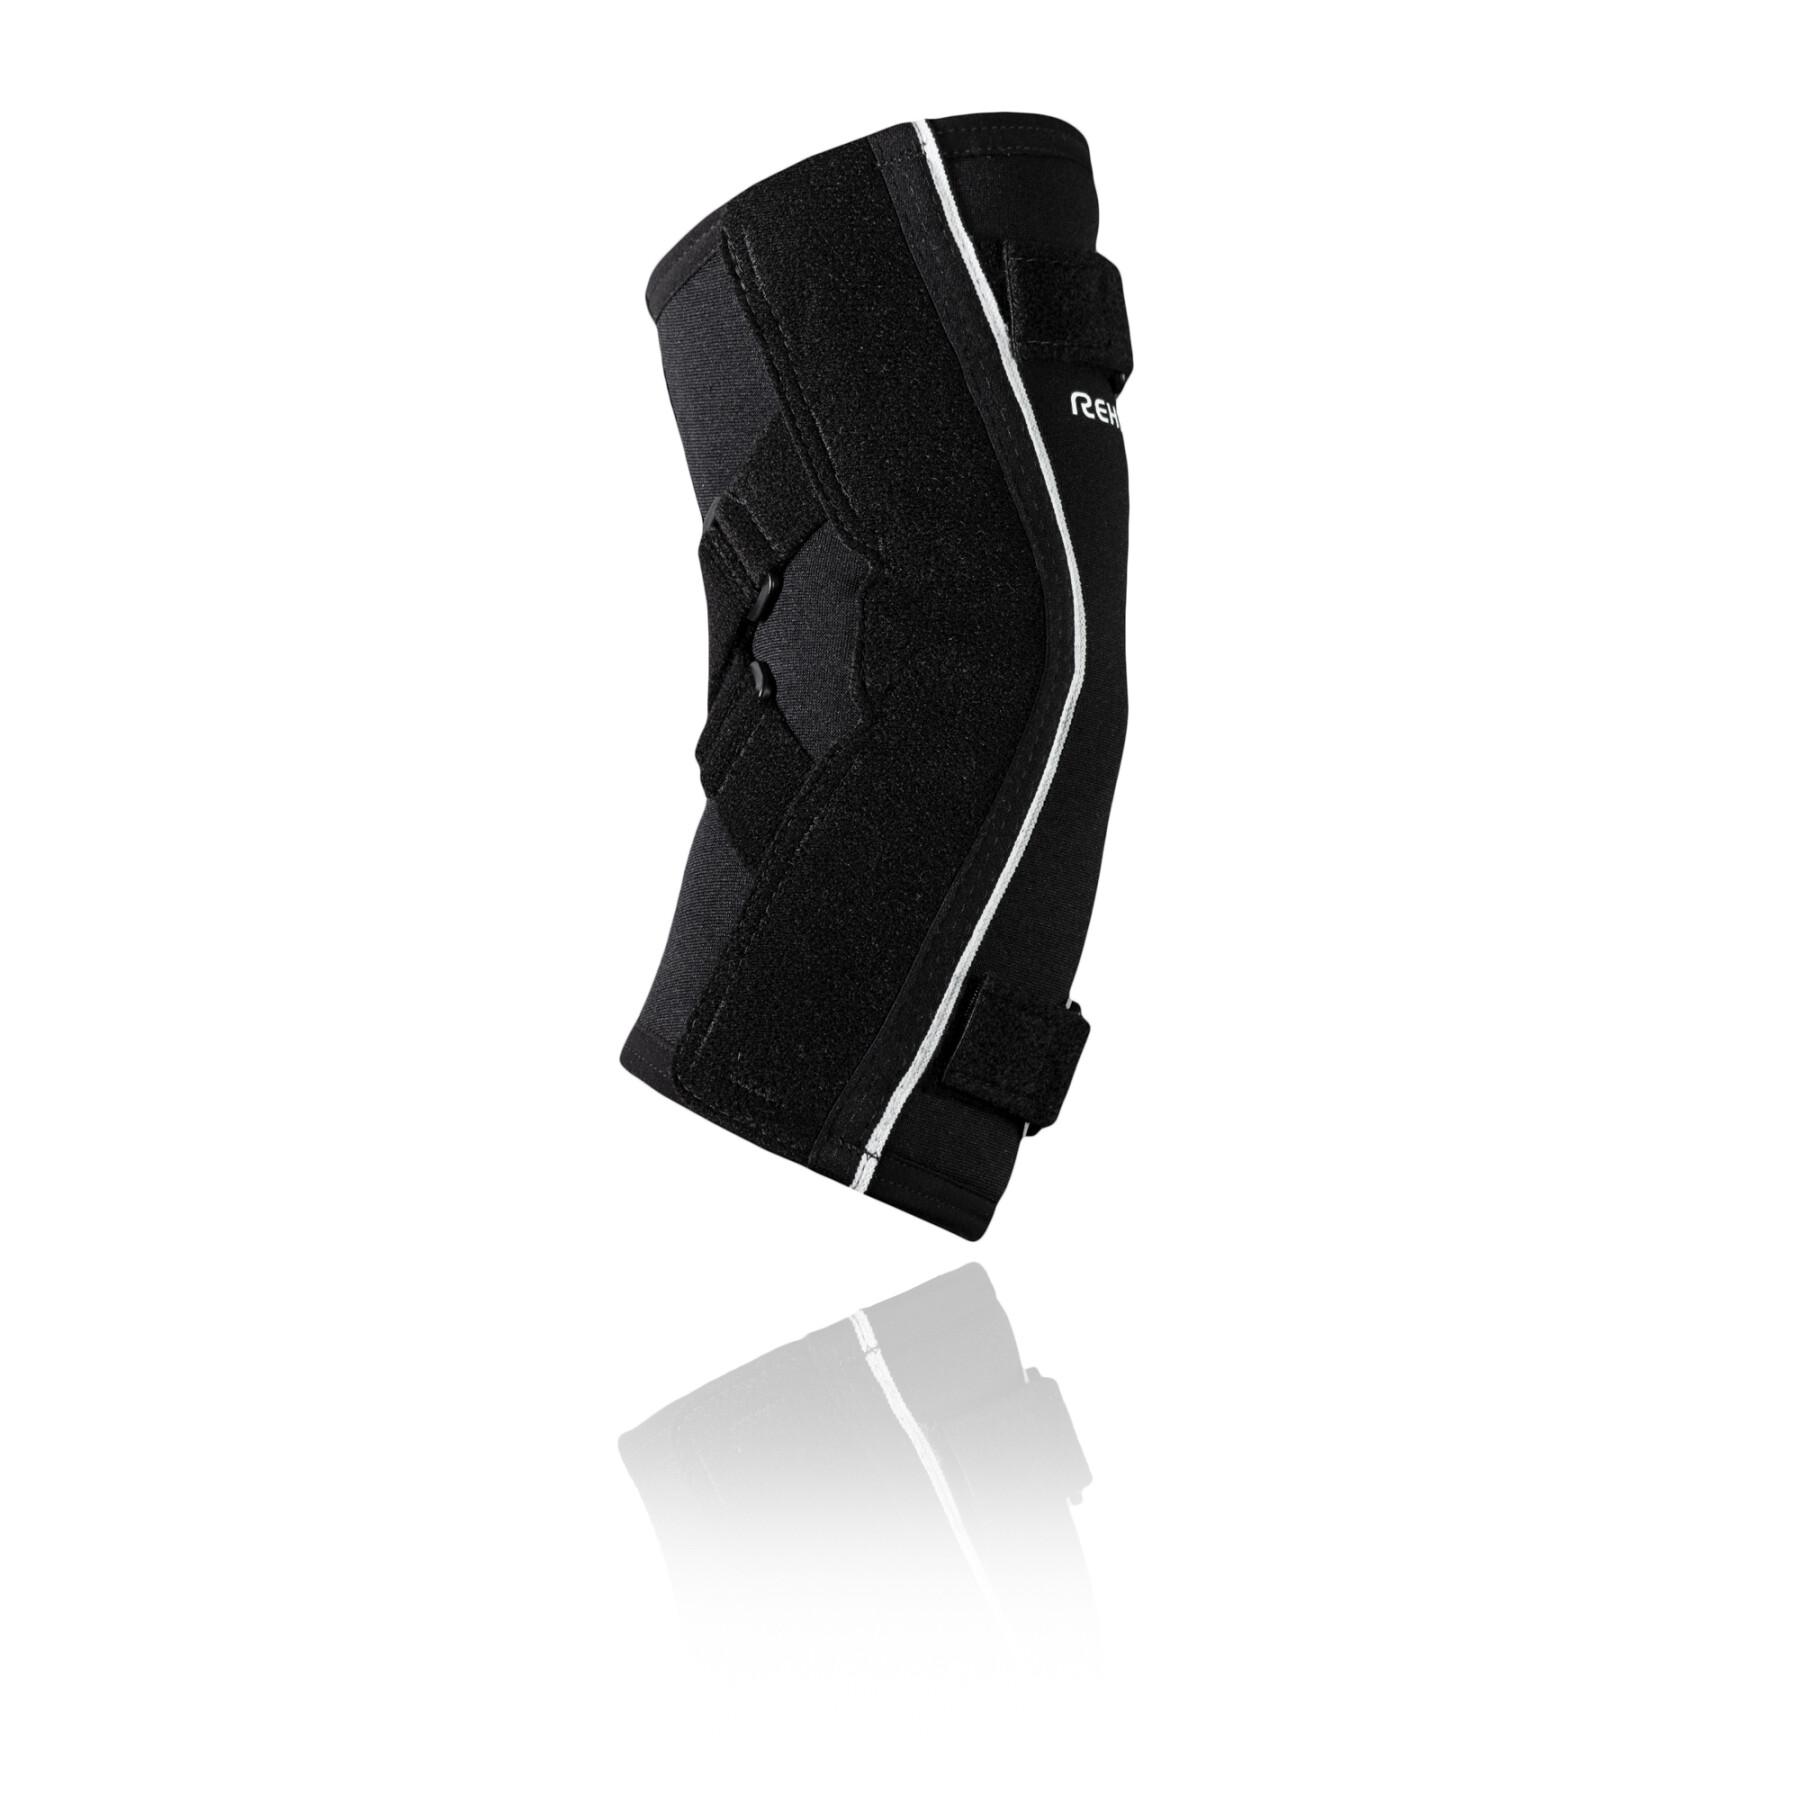 Hyper-x elbow pads Rehband Ud line